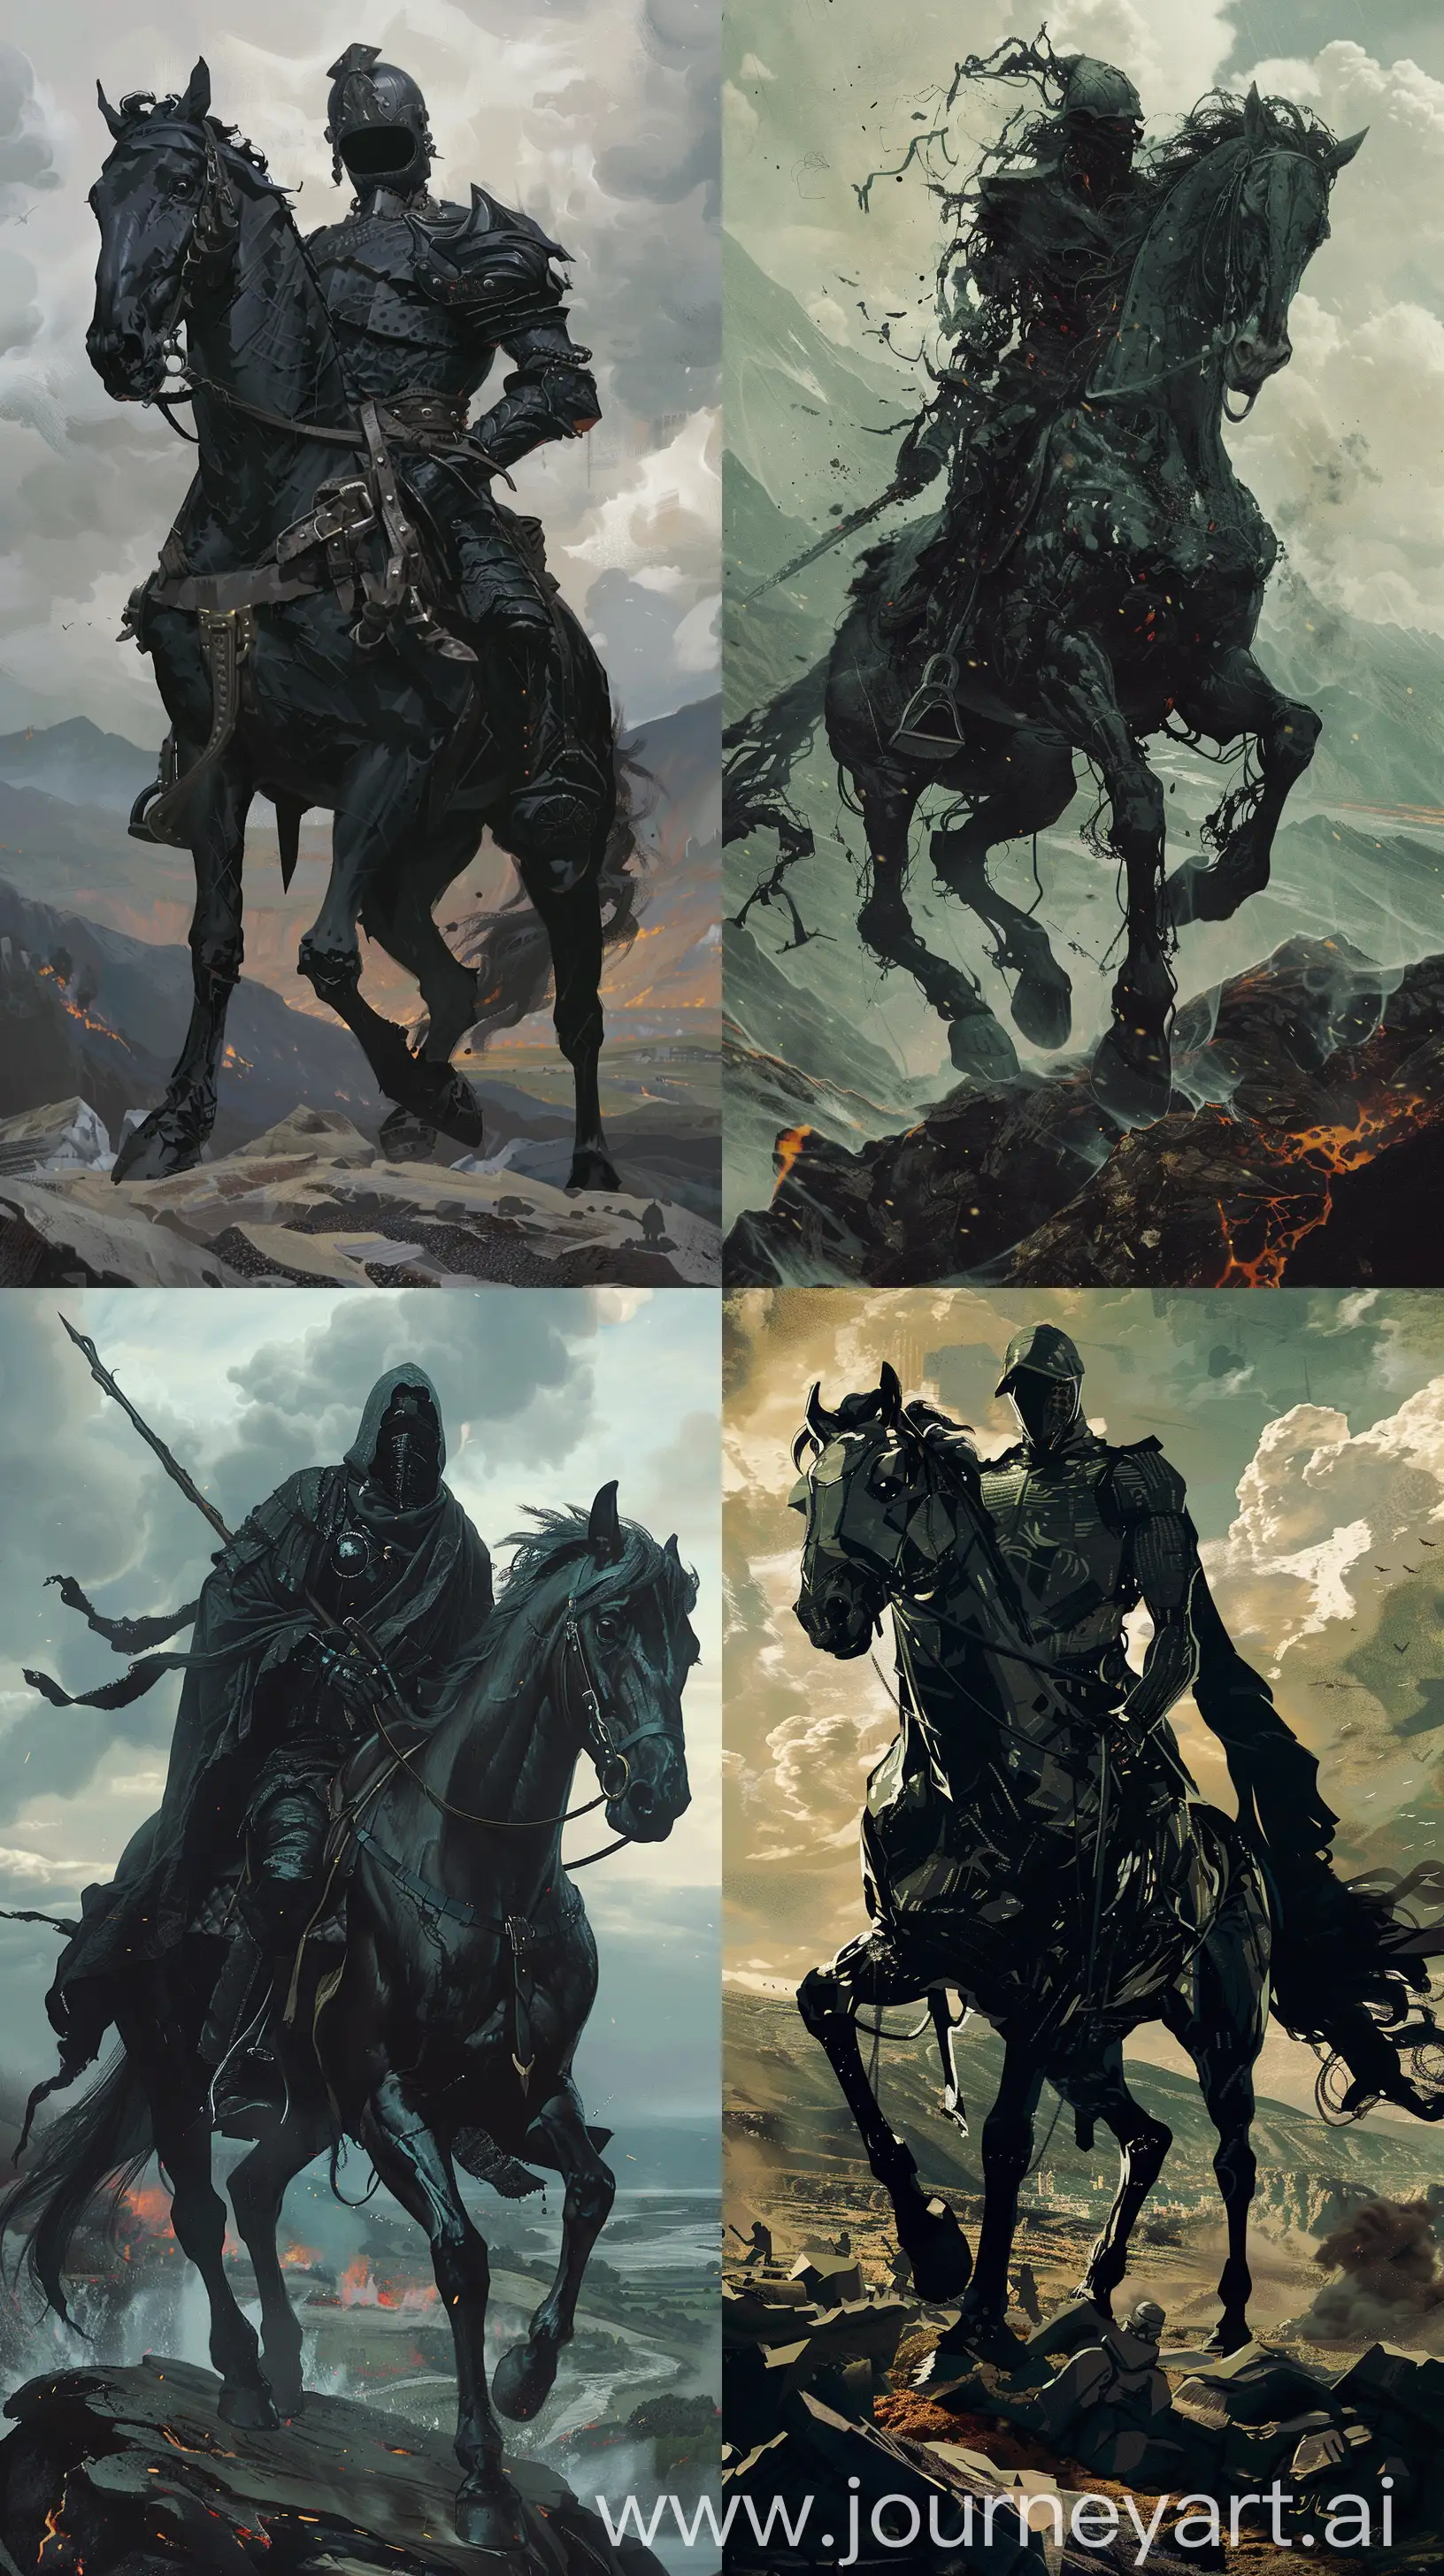 
Depict a reimagined version of one of the Four Horsemen of the Apocalypse, adhering to ivan aivazovisky aesthetic painting. The character should be striking, with solid blacks and a minimalistic approach, set against a landscape that reflects the horseman's domain, whether it be war, famine, pestilence, or death. 8k uhd Maximalist Details, phone wallpaper, --ar 9:16